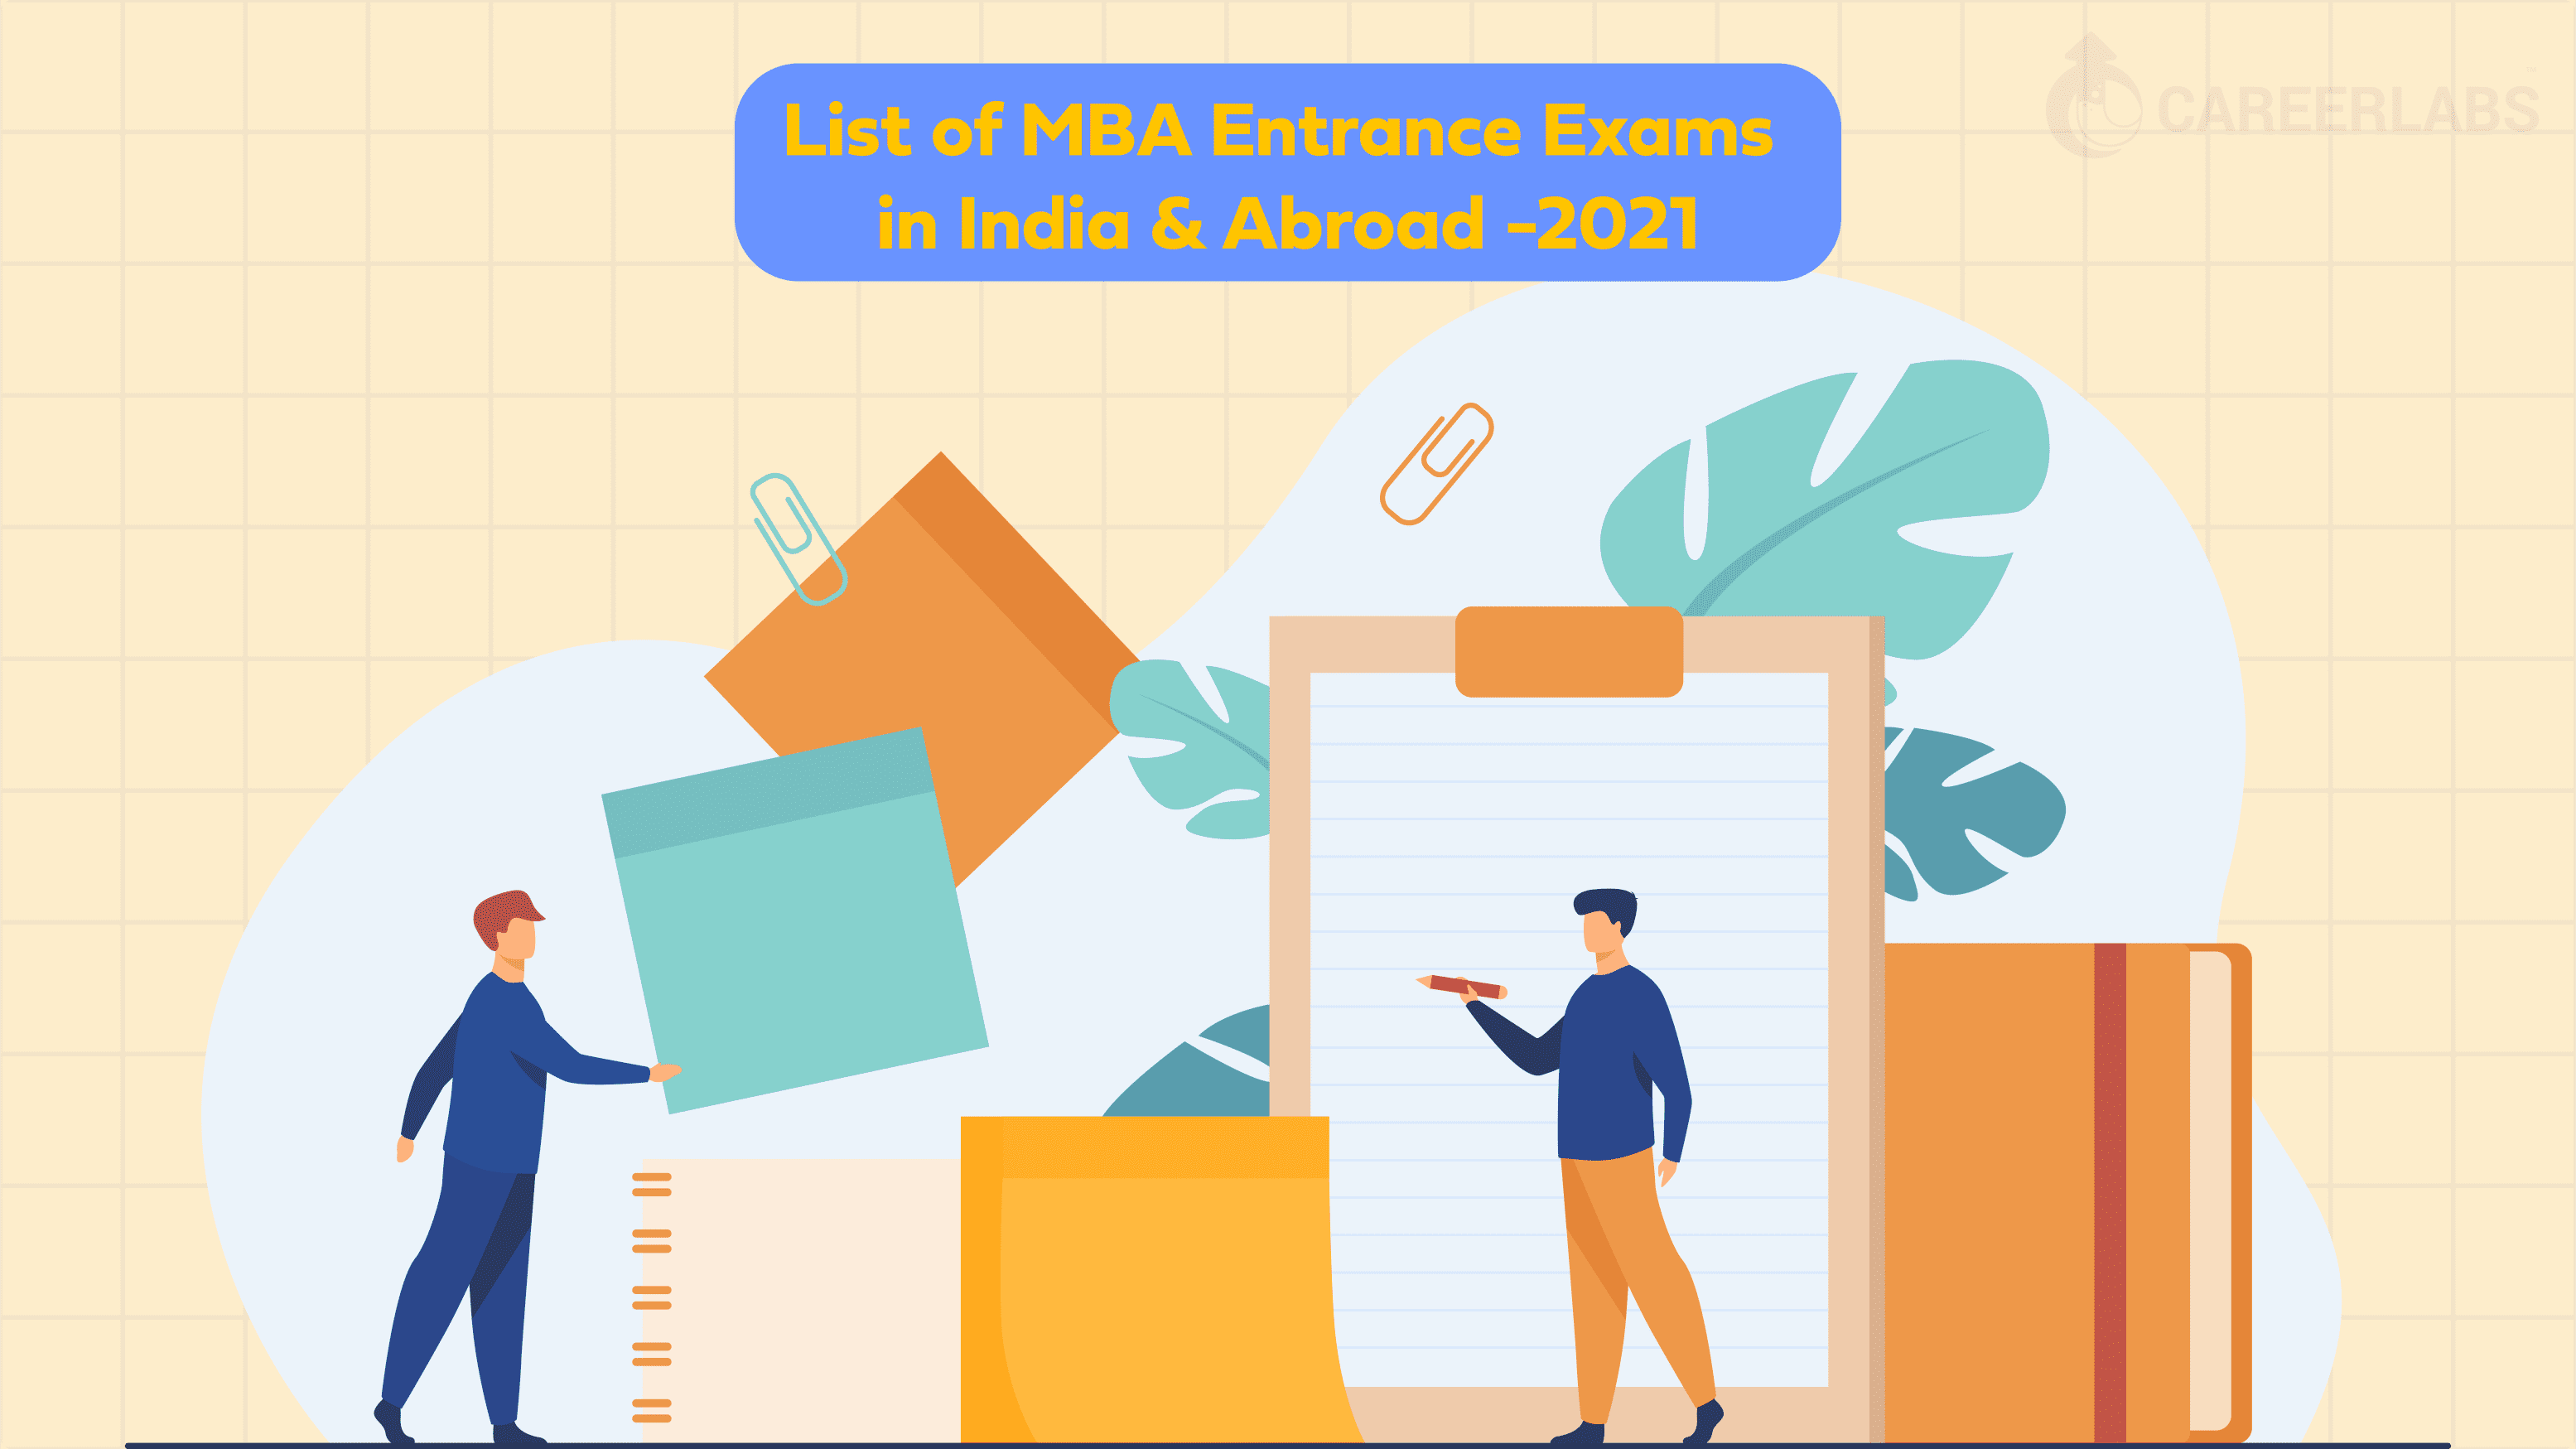 List of MBA Entrance Exams in India & Abroad- 2021